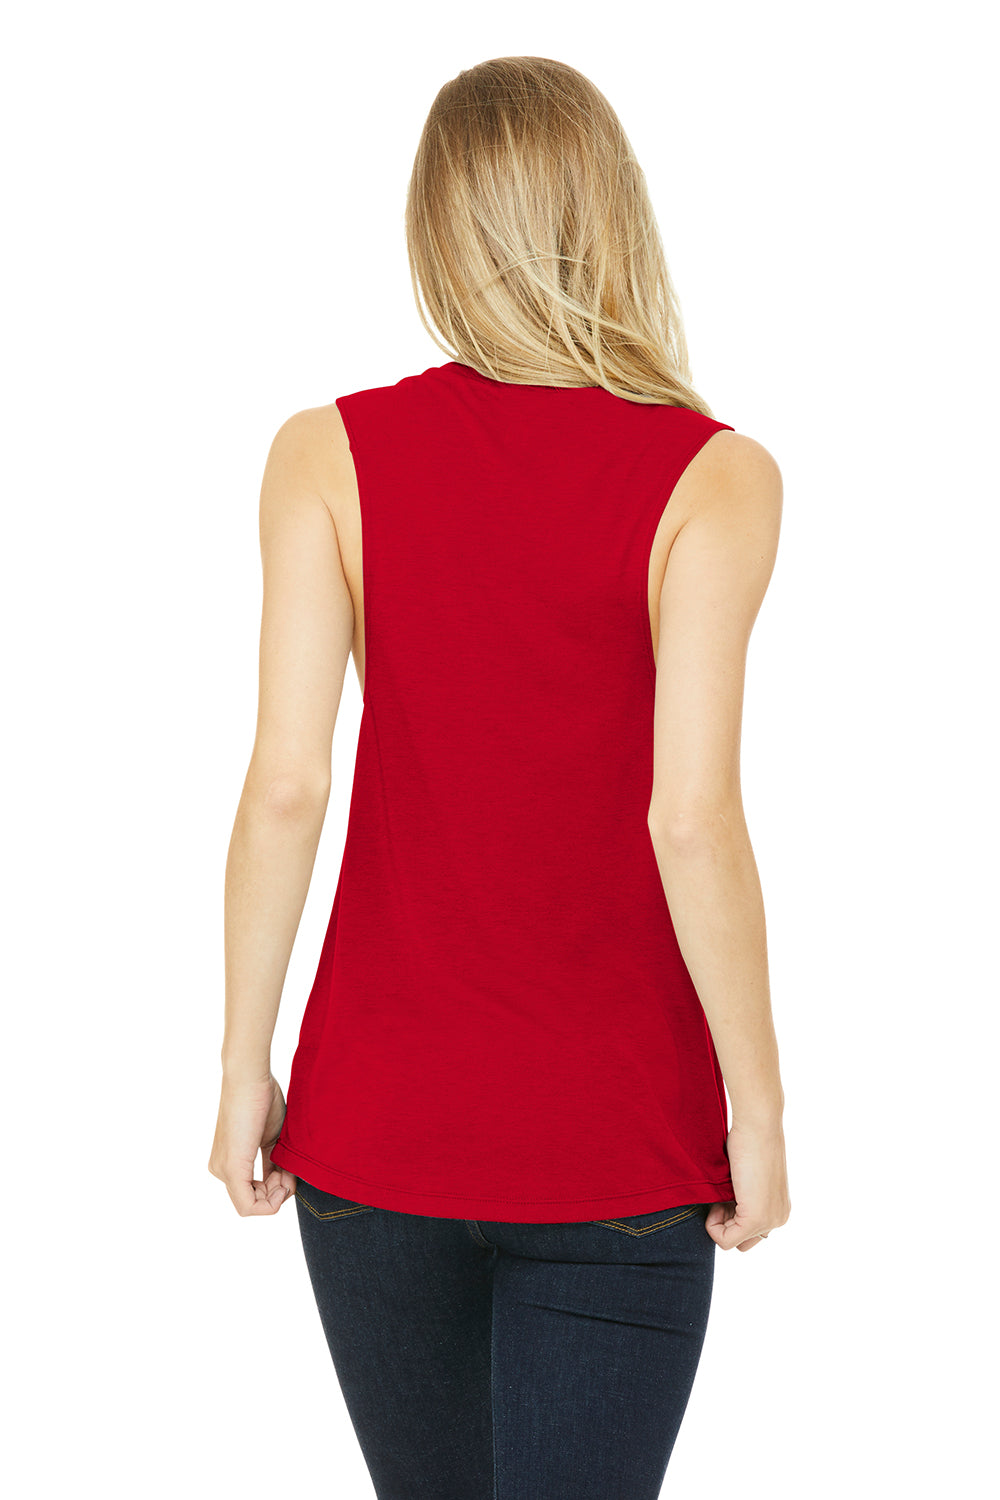 Bella + Canvas BC8803/B8803/8803 Womens Flowy Muscle Tank Top Red Model Back